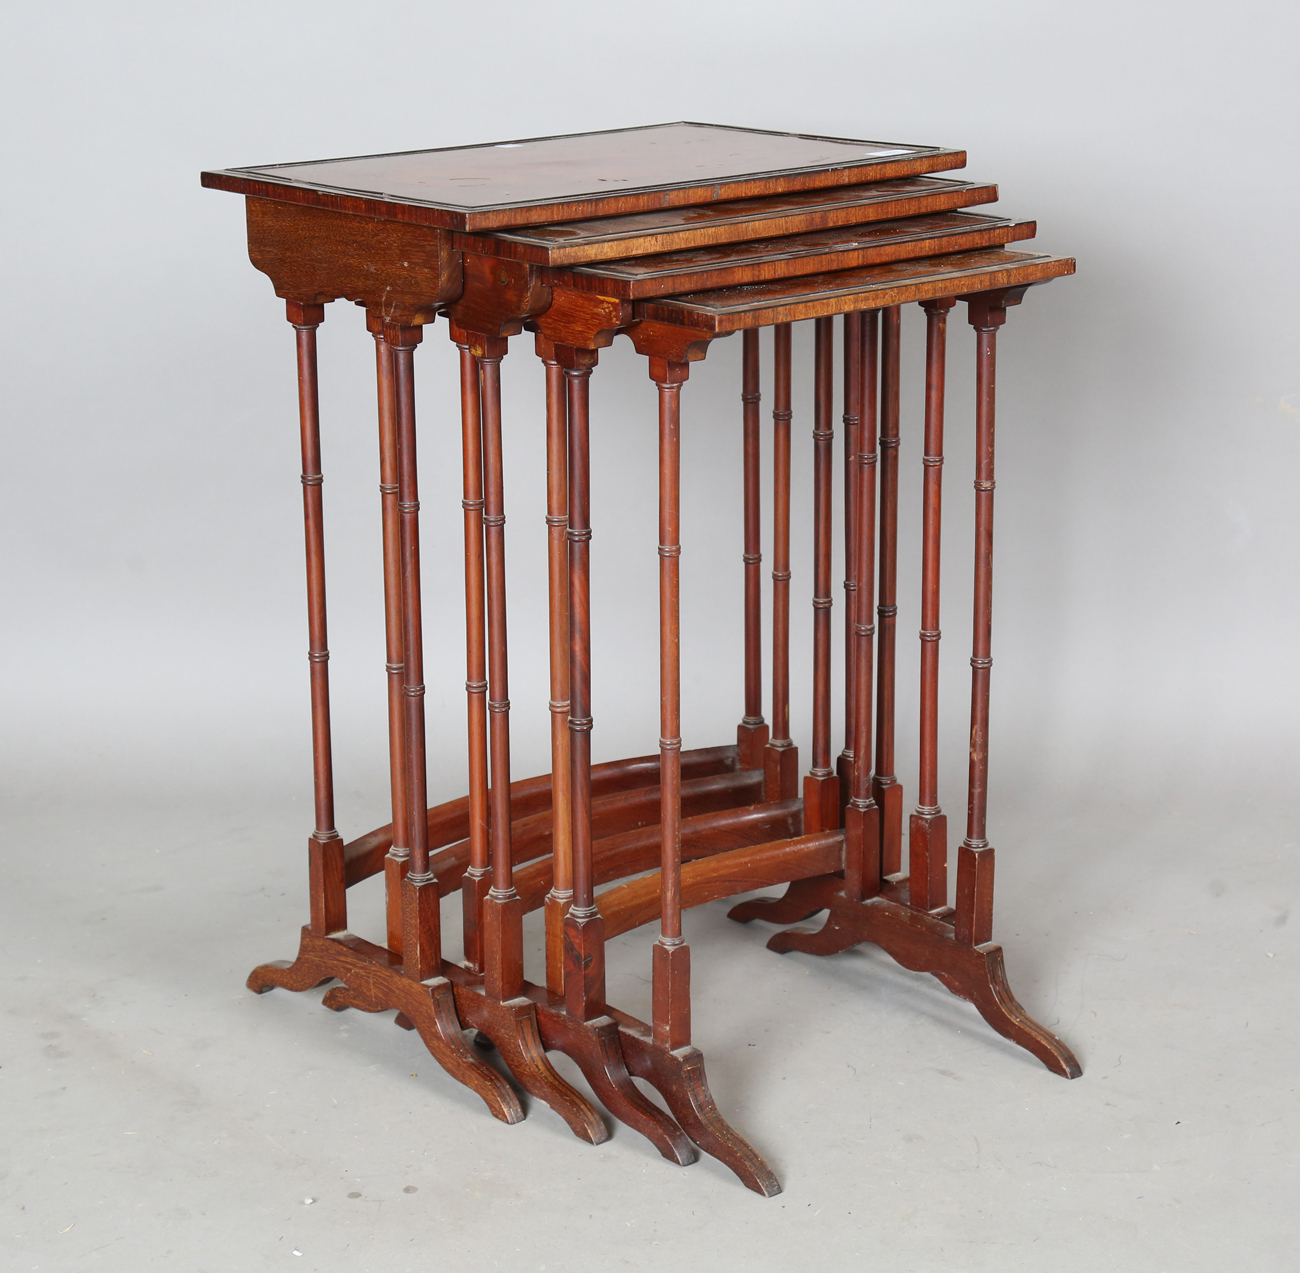 An Edwardian mahogany quartetto nest of occasional tables, each with an oval amboyna reserve and